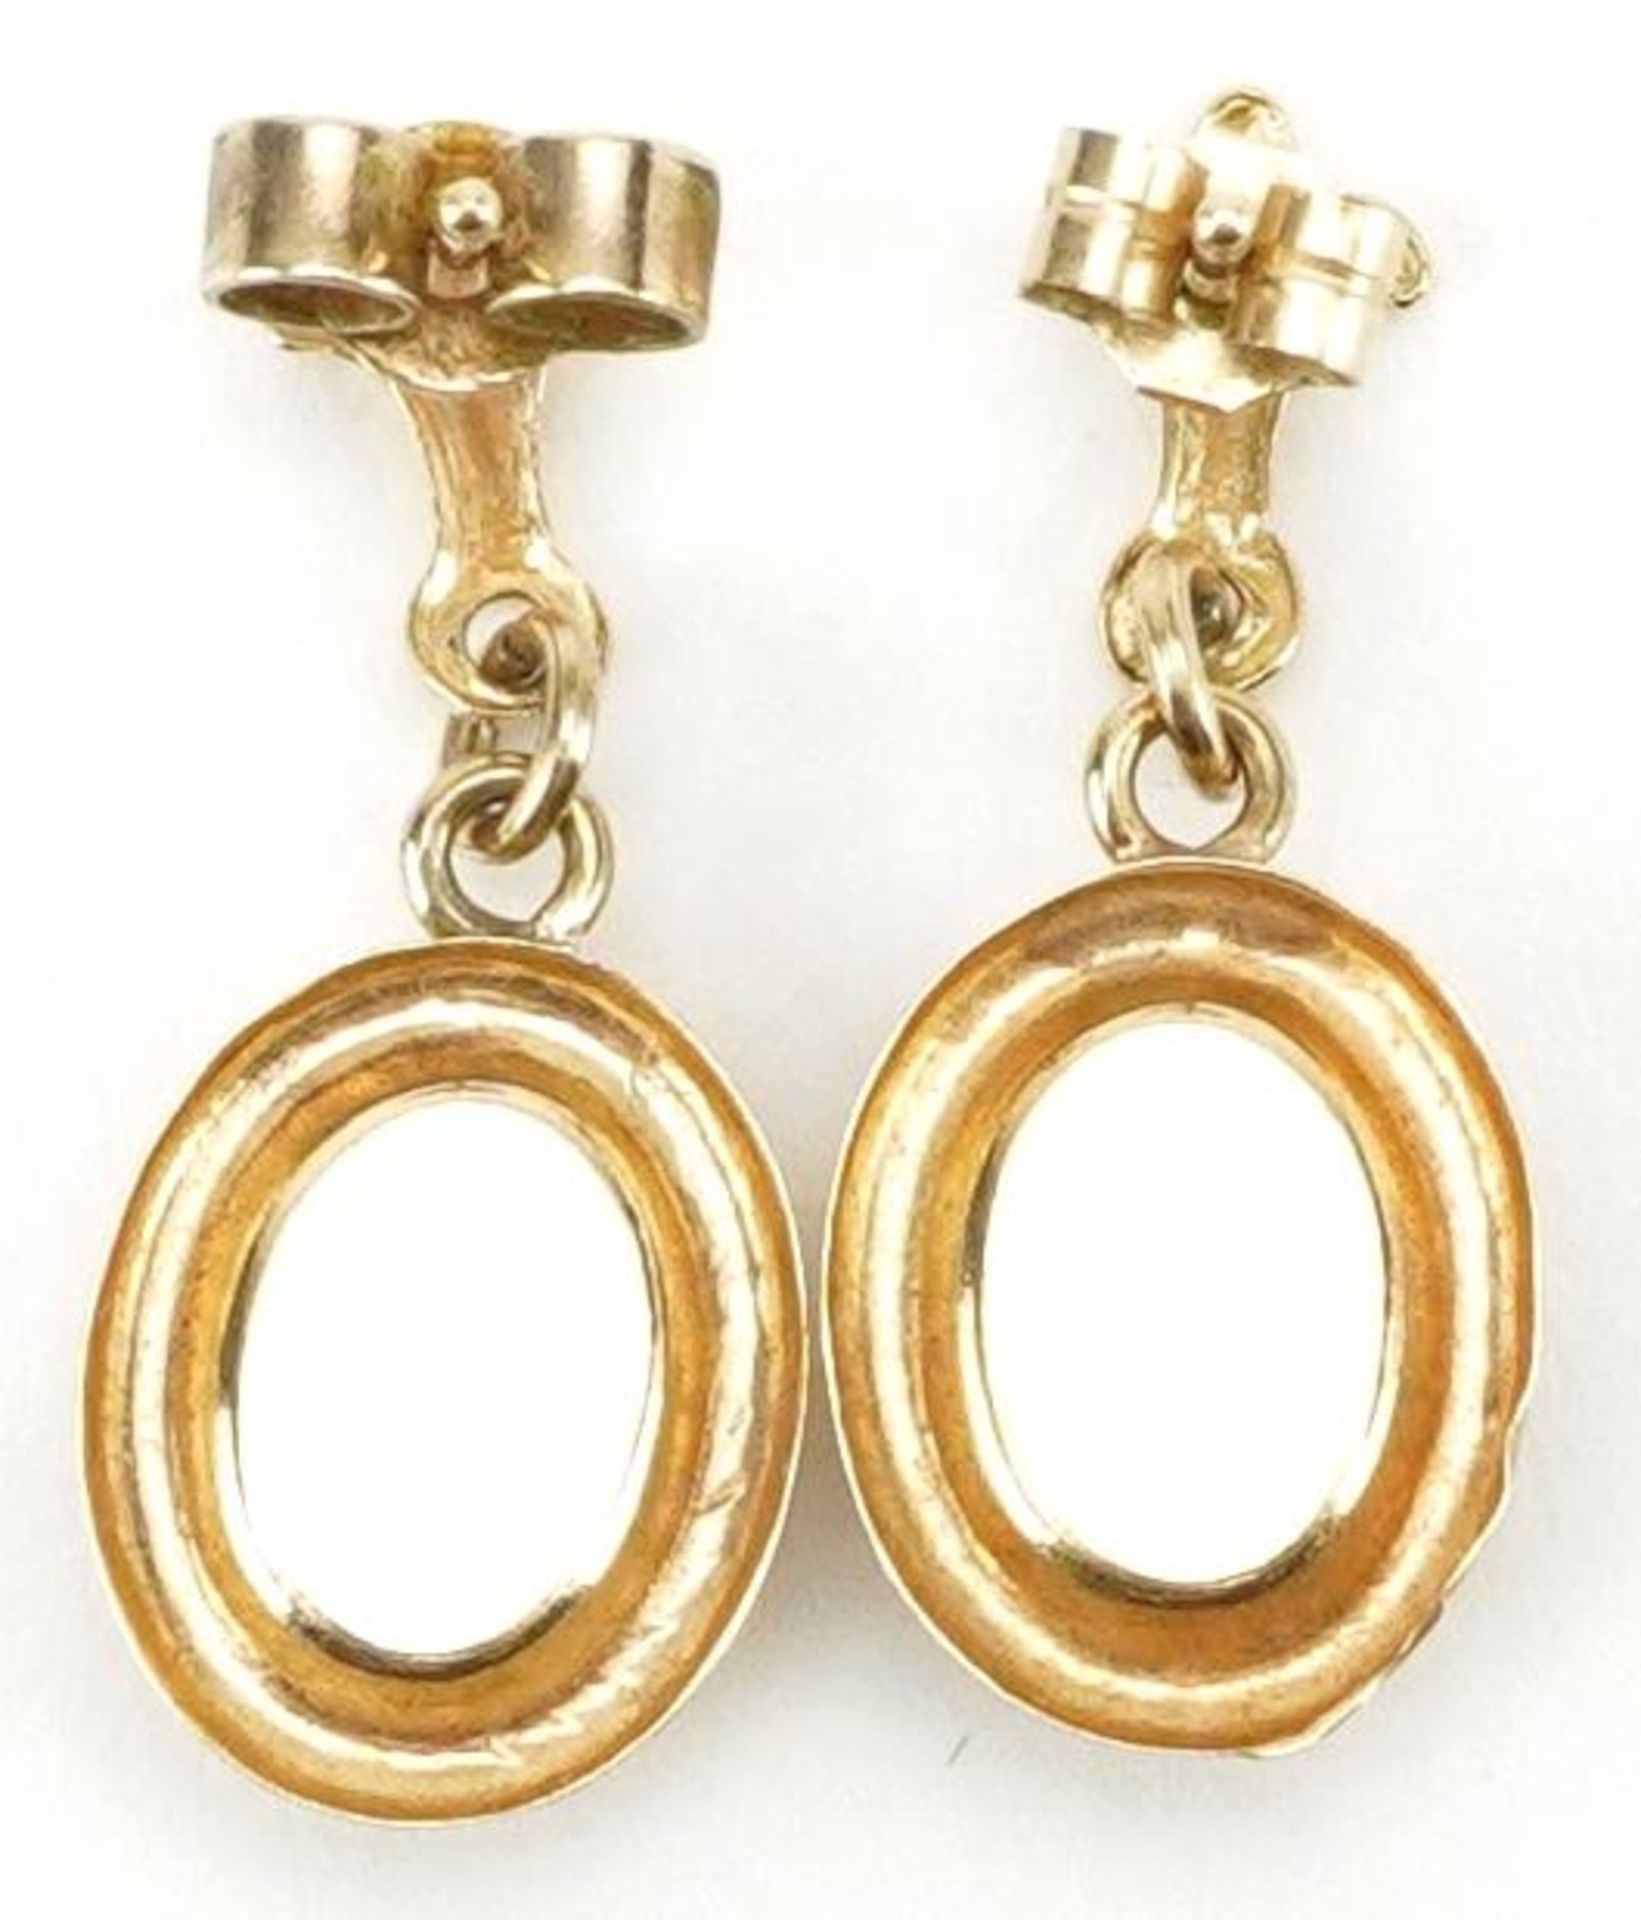 Pair of 9ct gold cabochon opal drop earrings, 1.9cm high, 0.7g - Image 2 of 2